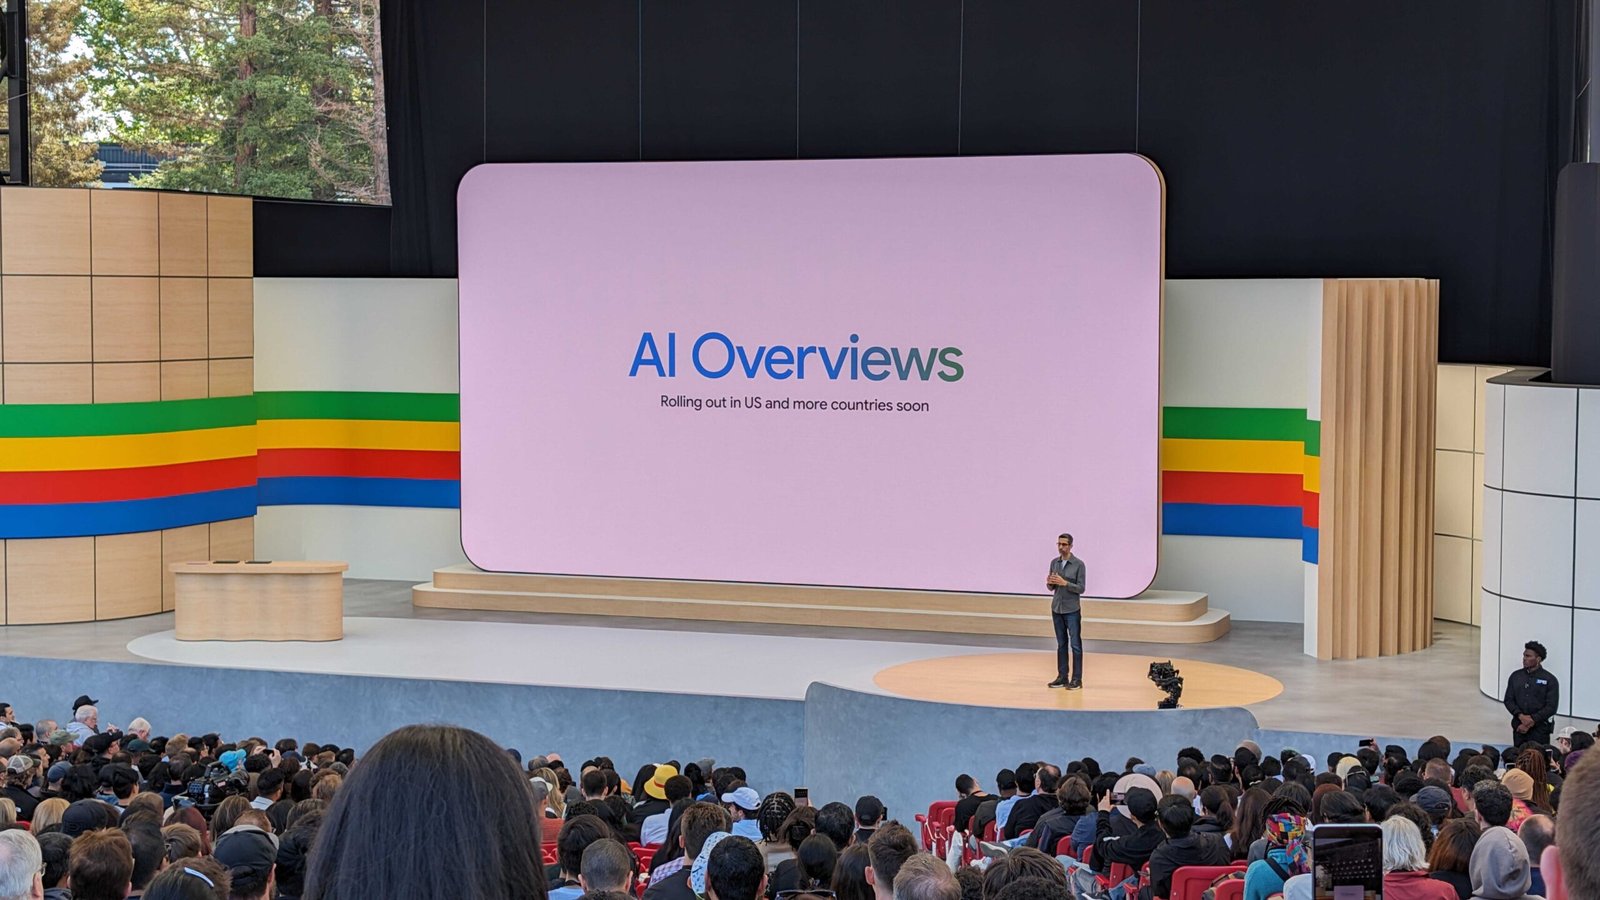 AI Overview results scaled back after original rollout, evidence suggests